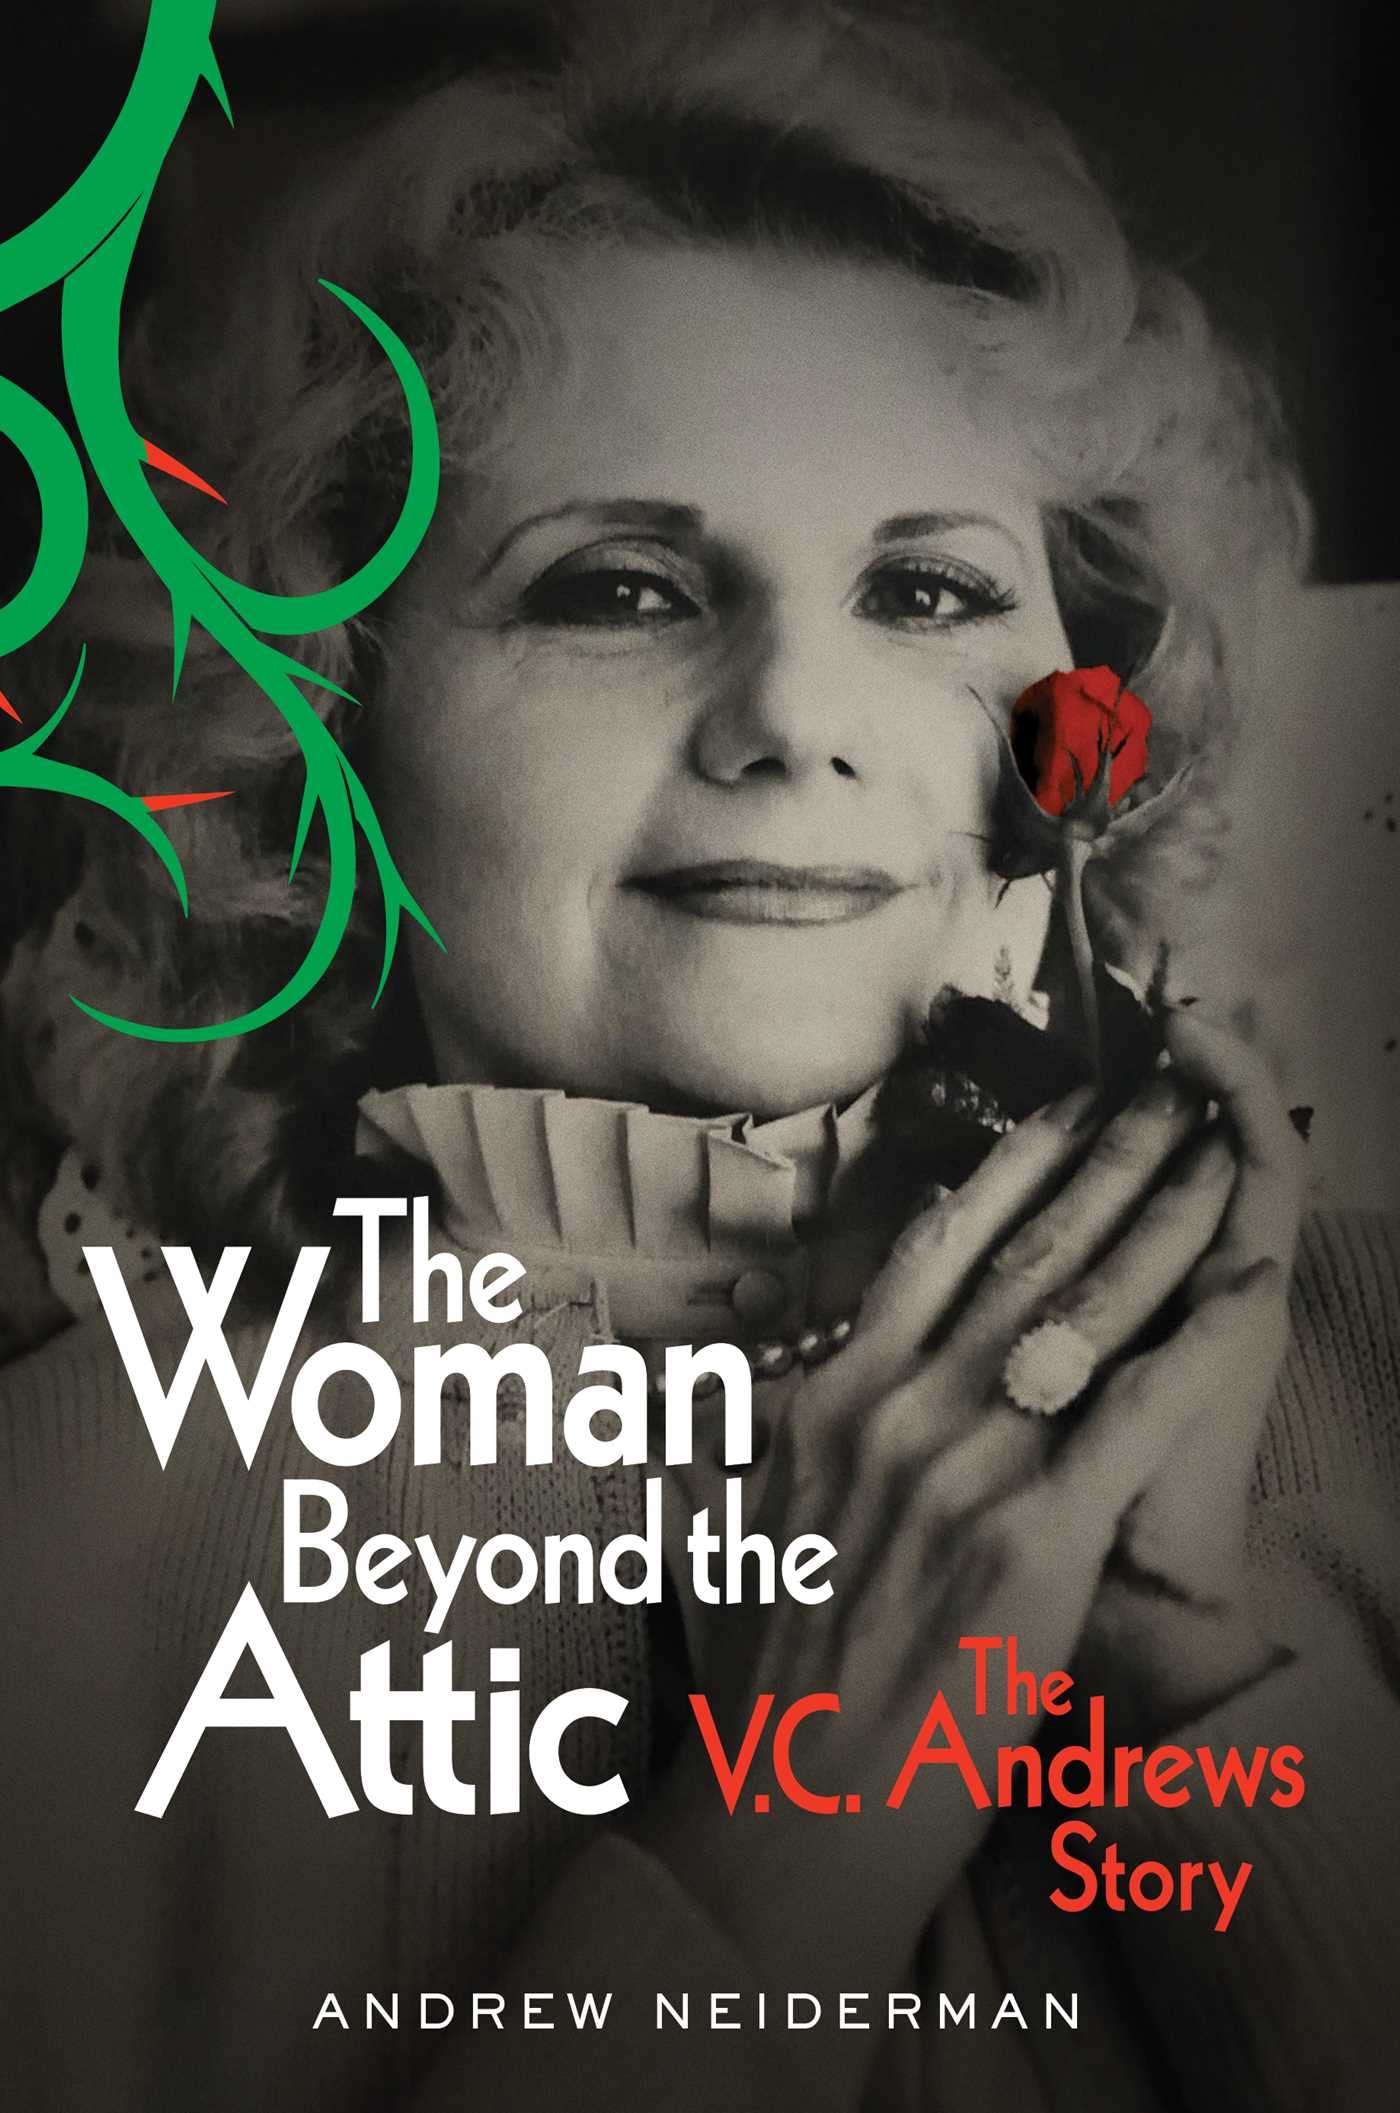 Image for "The Woman Beyond the Attic"